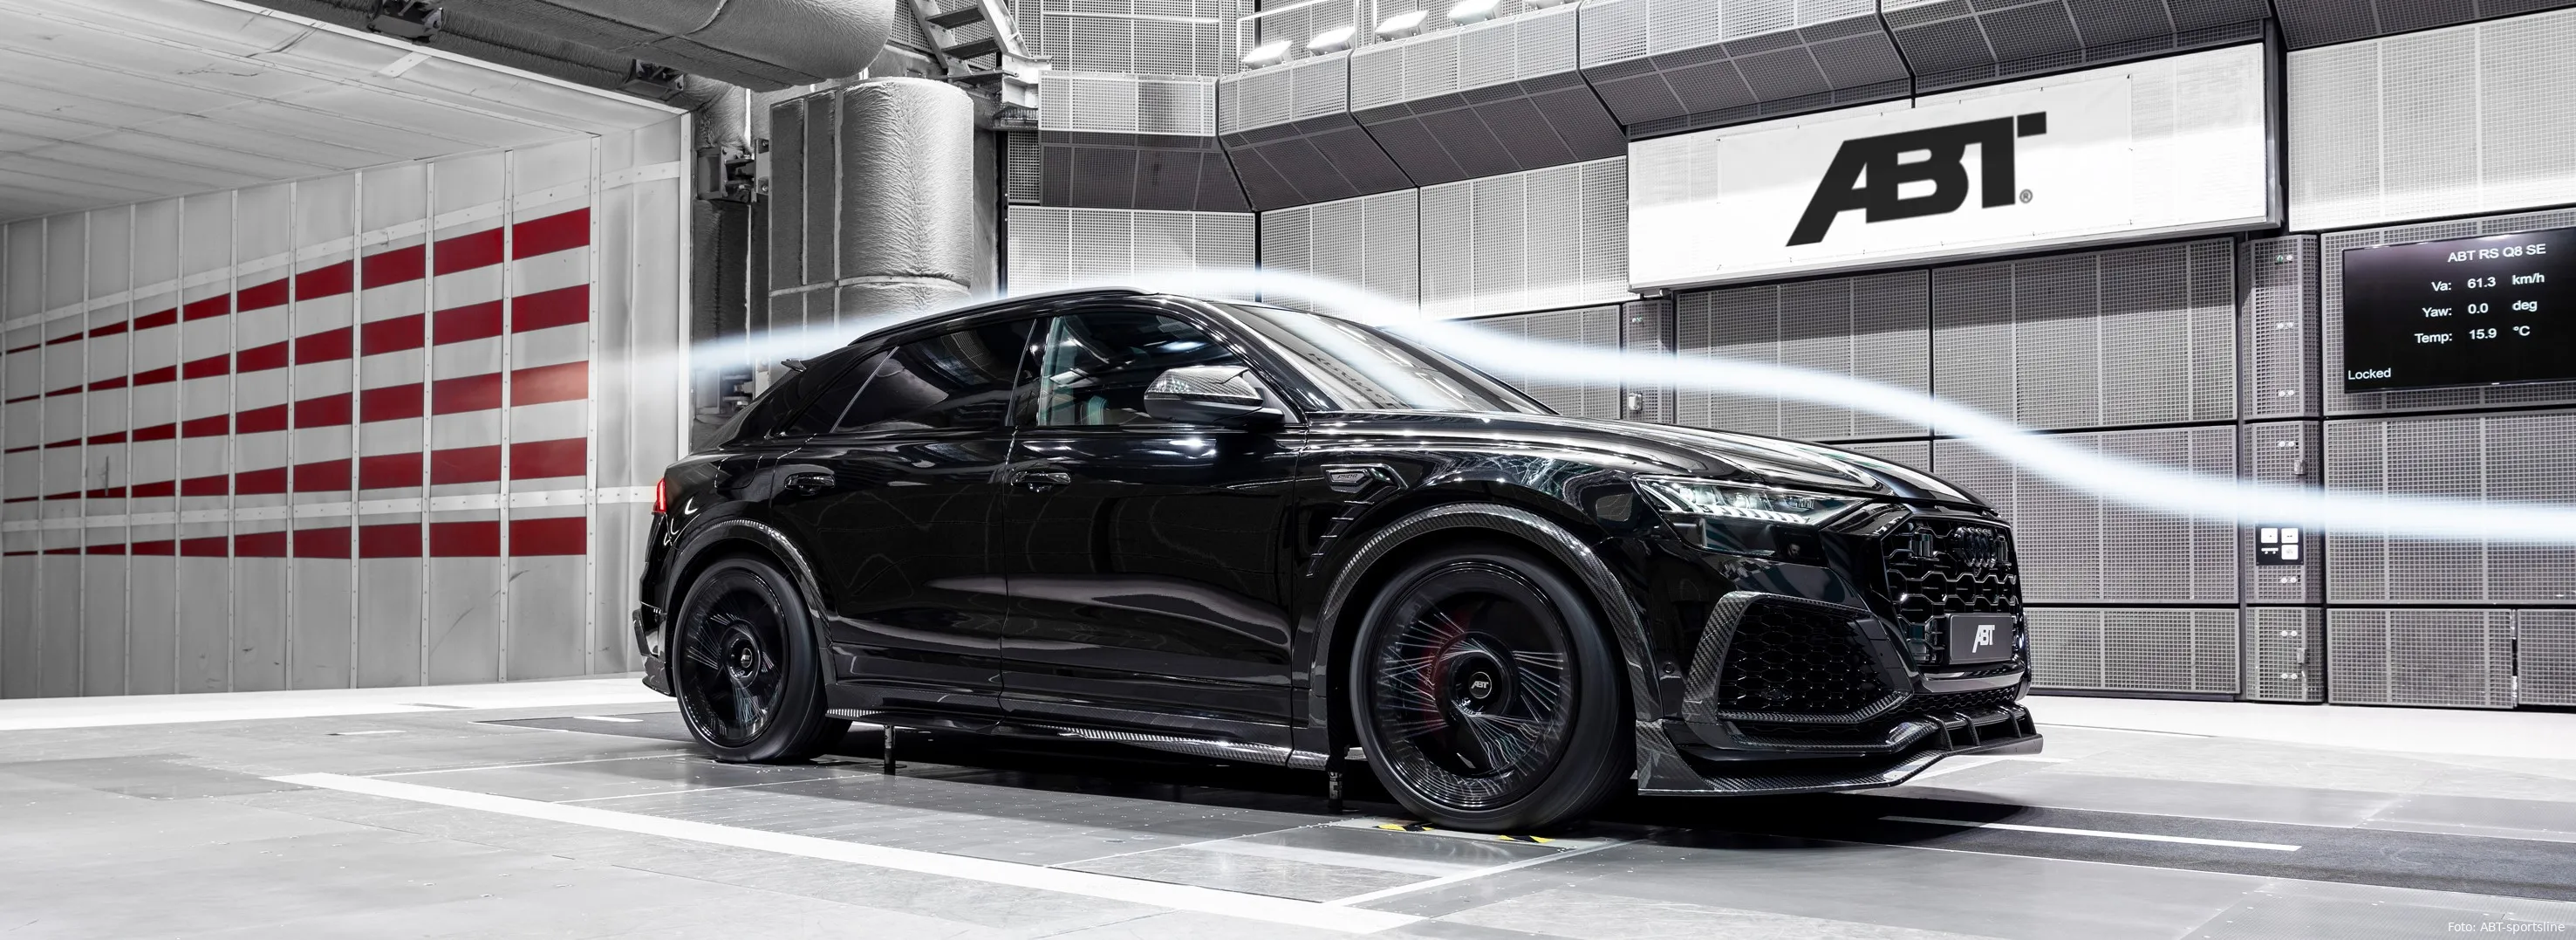 abt rsq8 se wind tunnel 1 v2